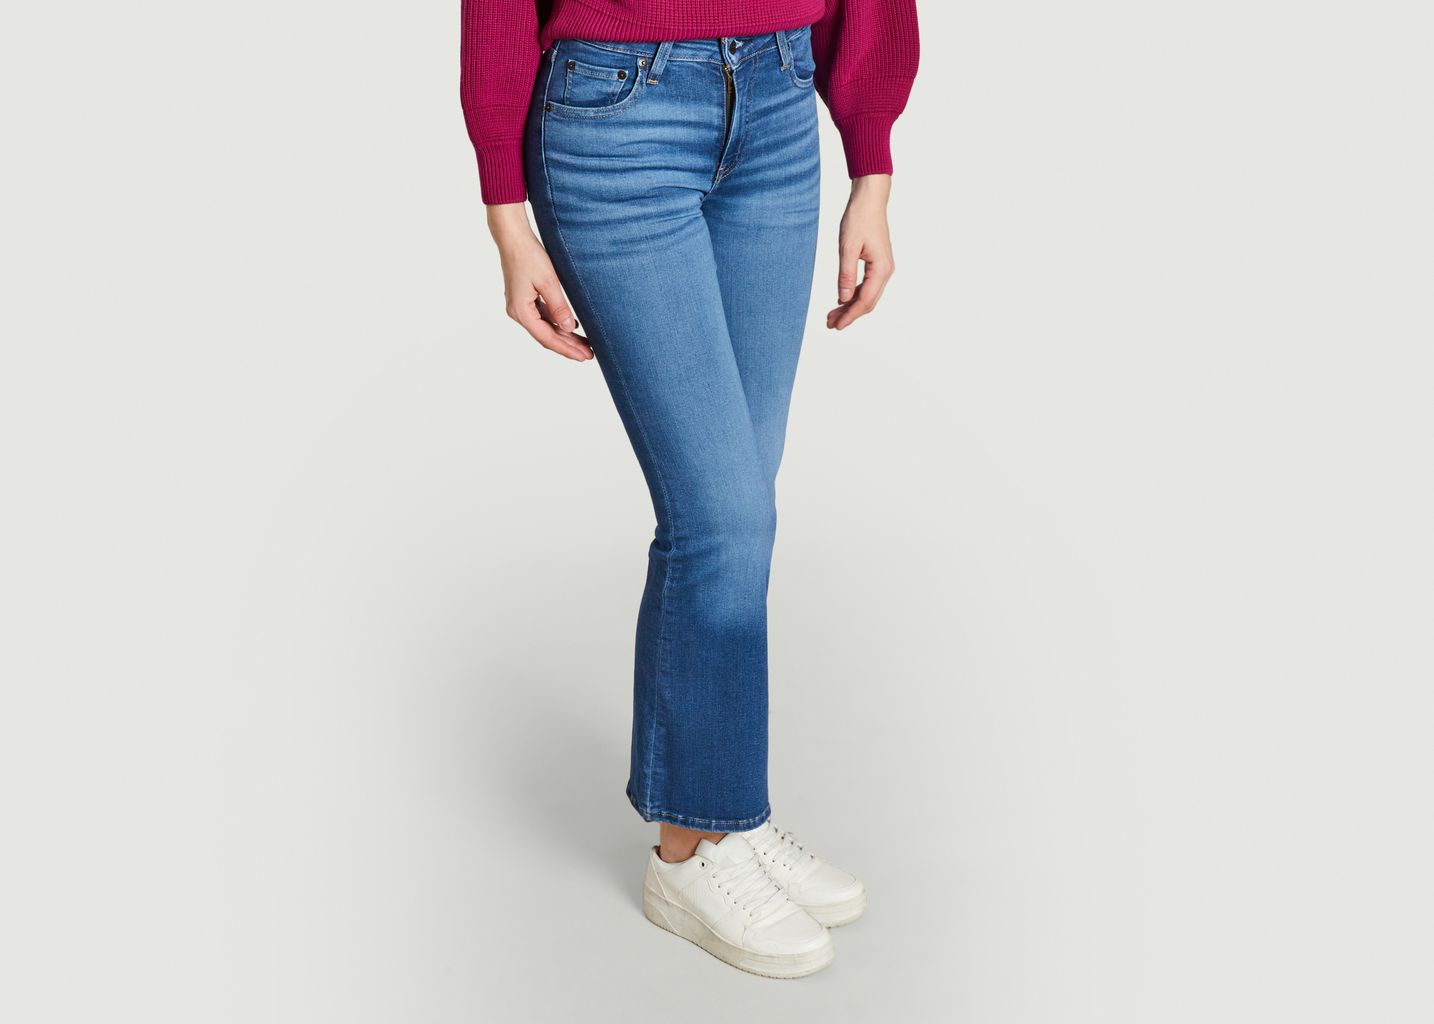 Jean 726™ flare - Levi's Red Tab